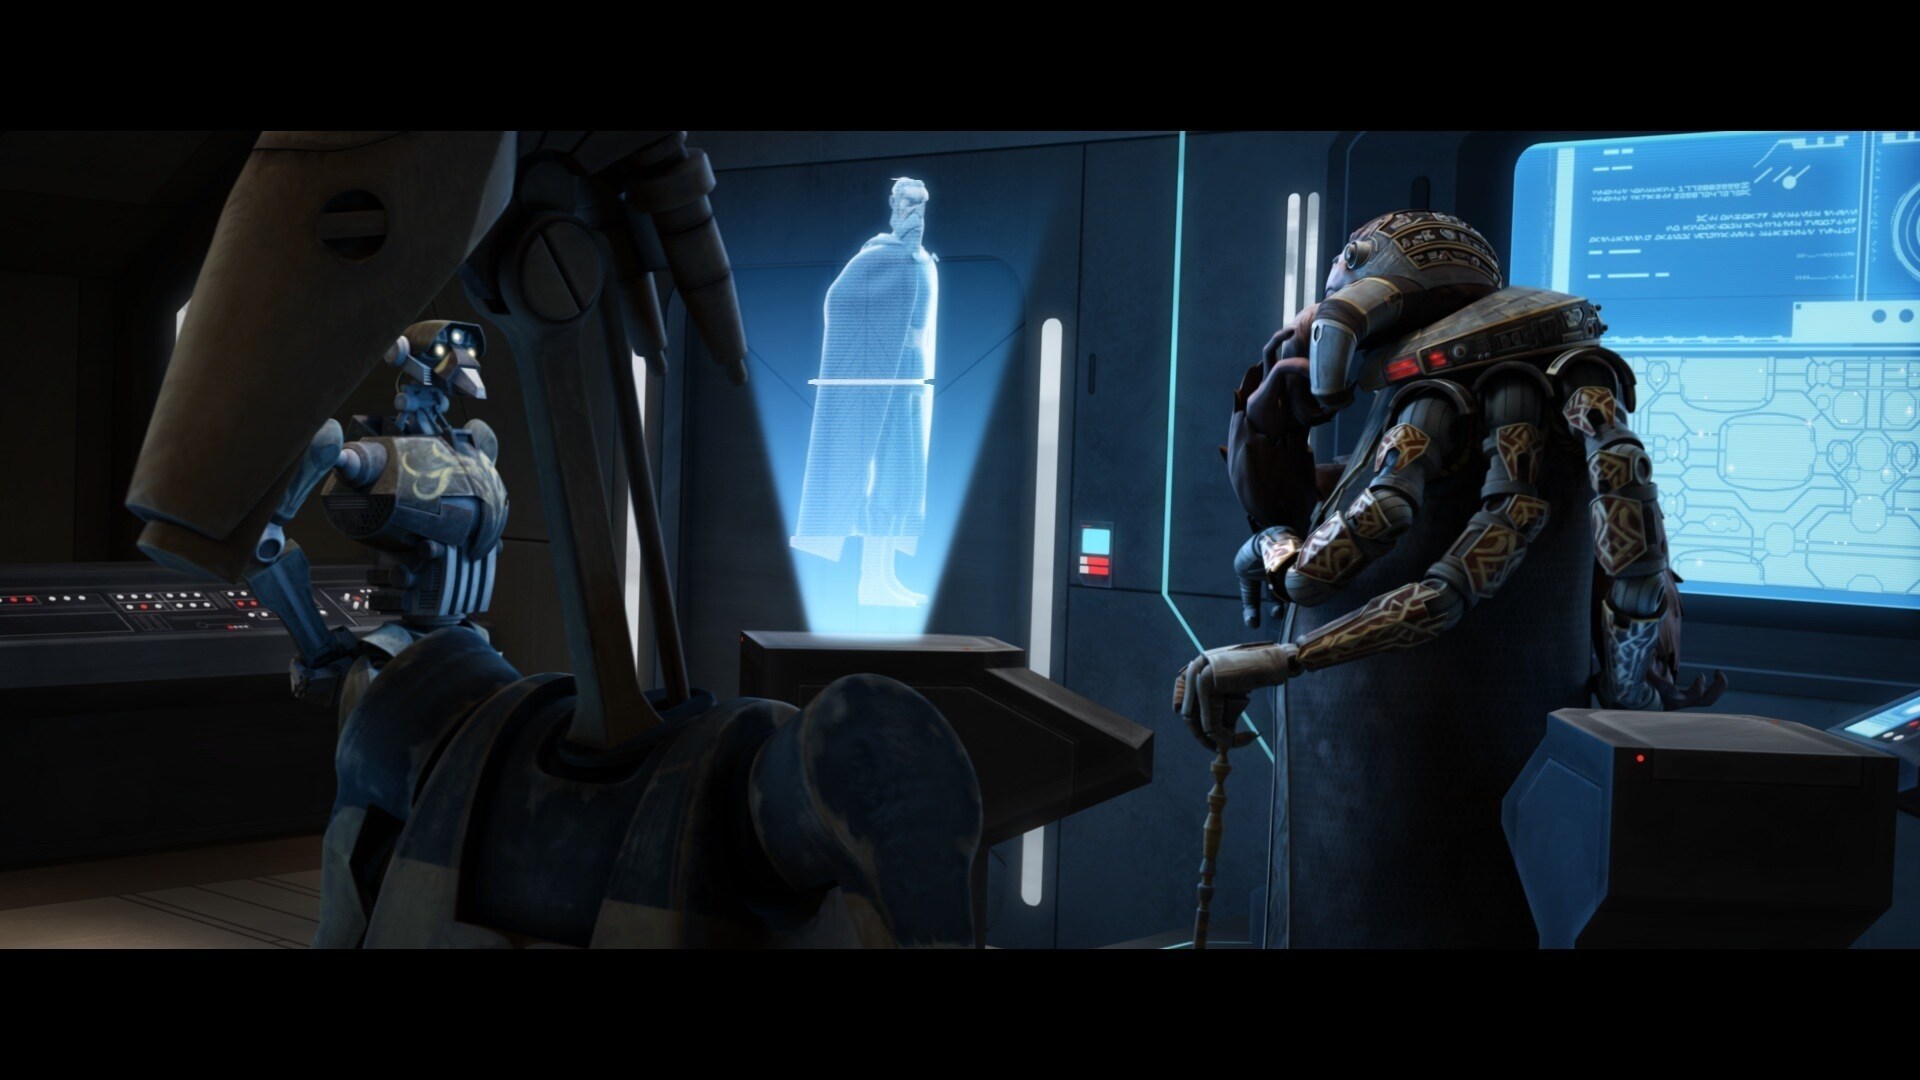 Admiral Trench contacts Count Dooku via hologram, and informs him of the deadly betrayal perpetra...